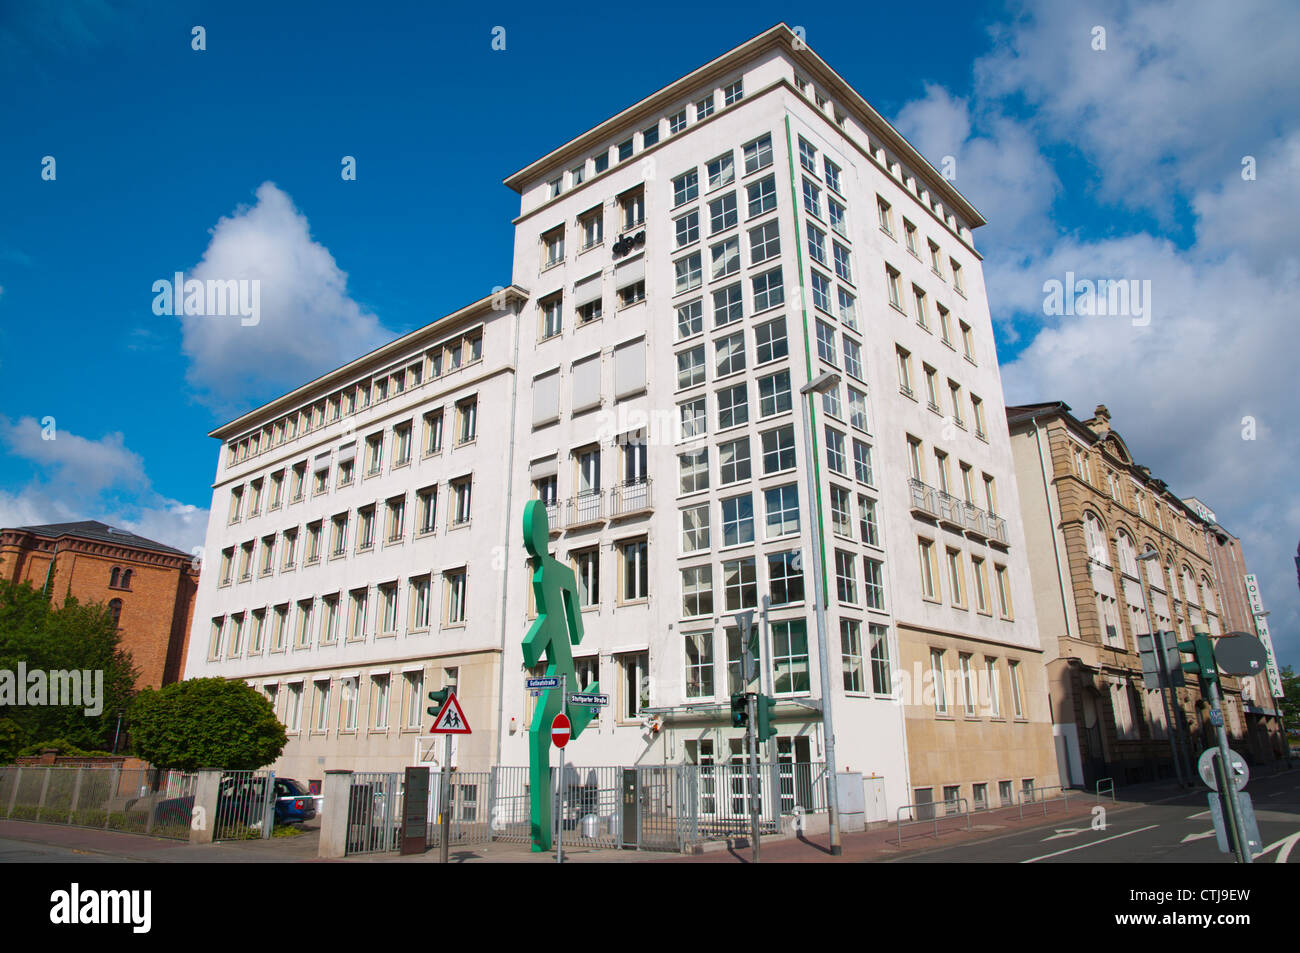 Headquarters of dpa Picture-Alliance GmbH picture alliance company Bahnhofsviertel district Frankfurt am Main Germany Europe Stock Photo